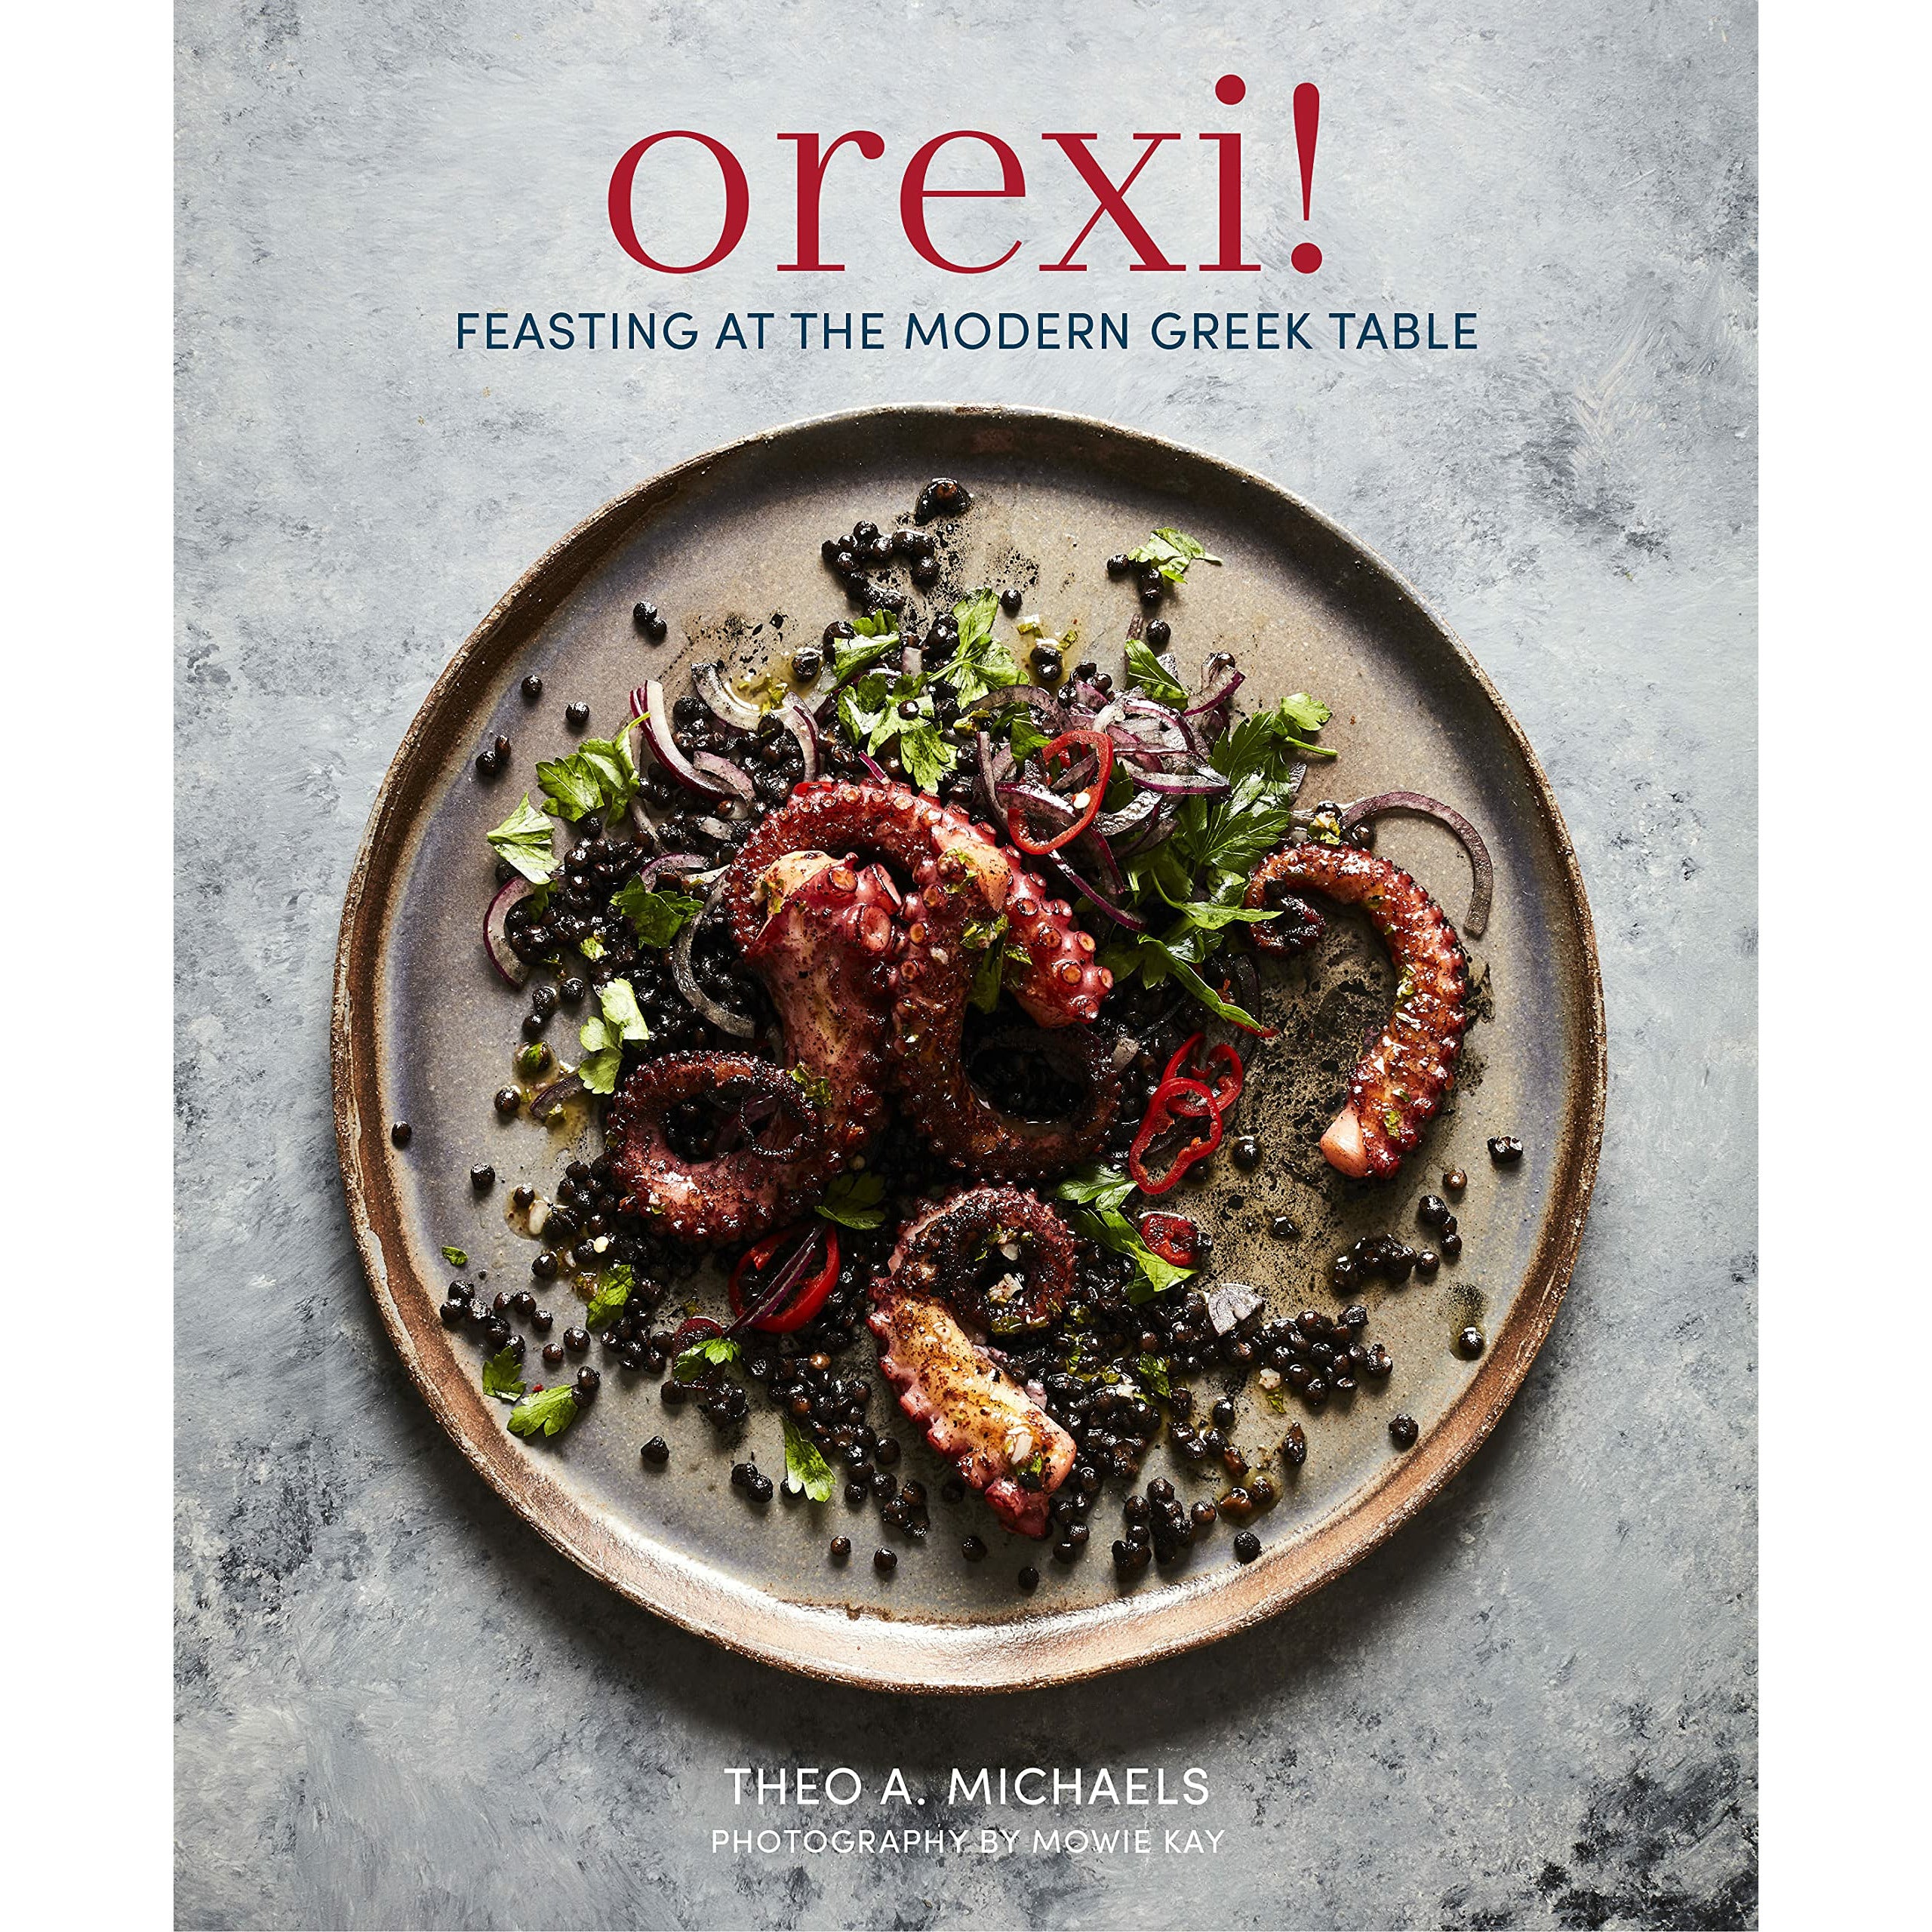 Orexi!: Feasting at the modern Greek table Hardcover – Illustrated, April 9, 2019